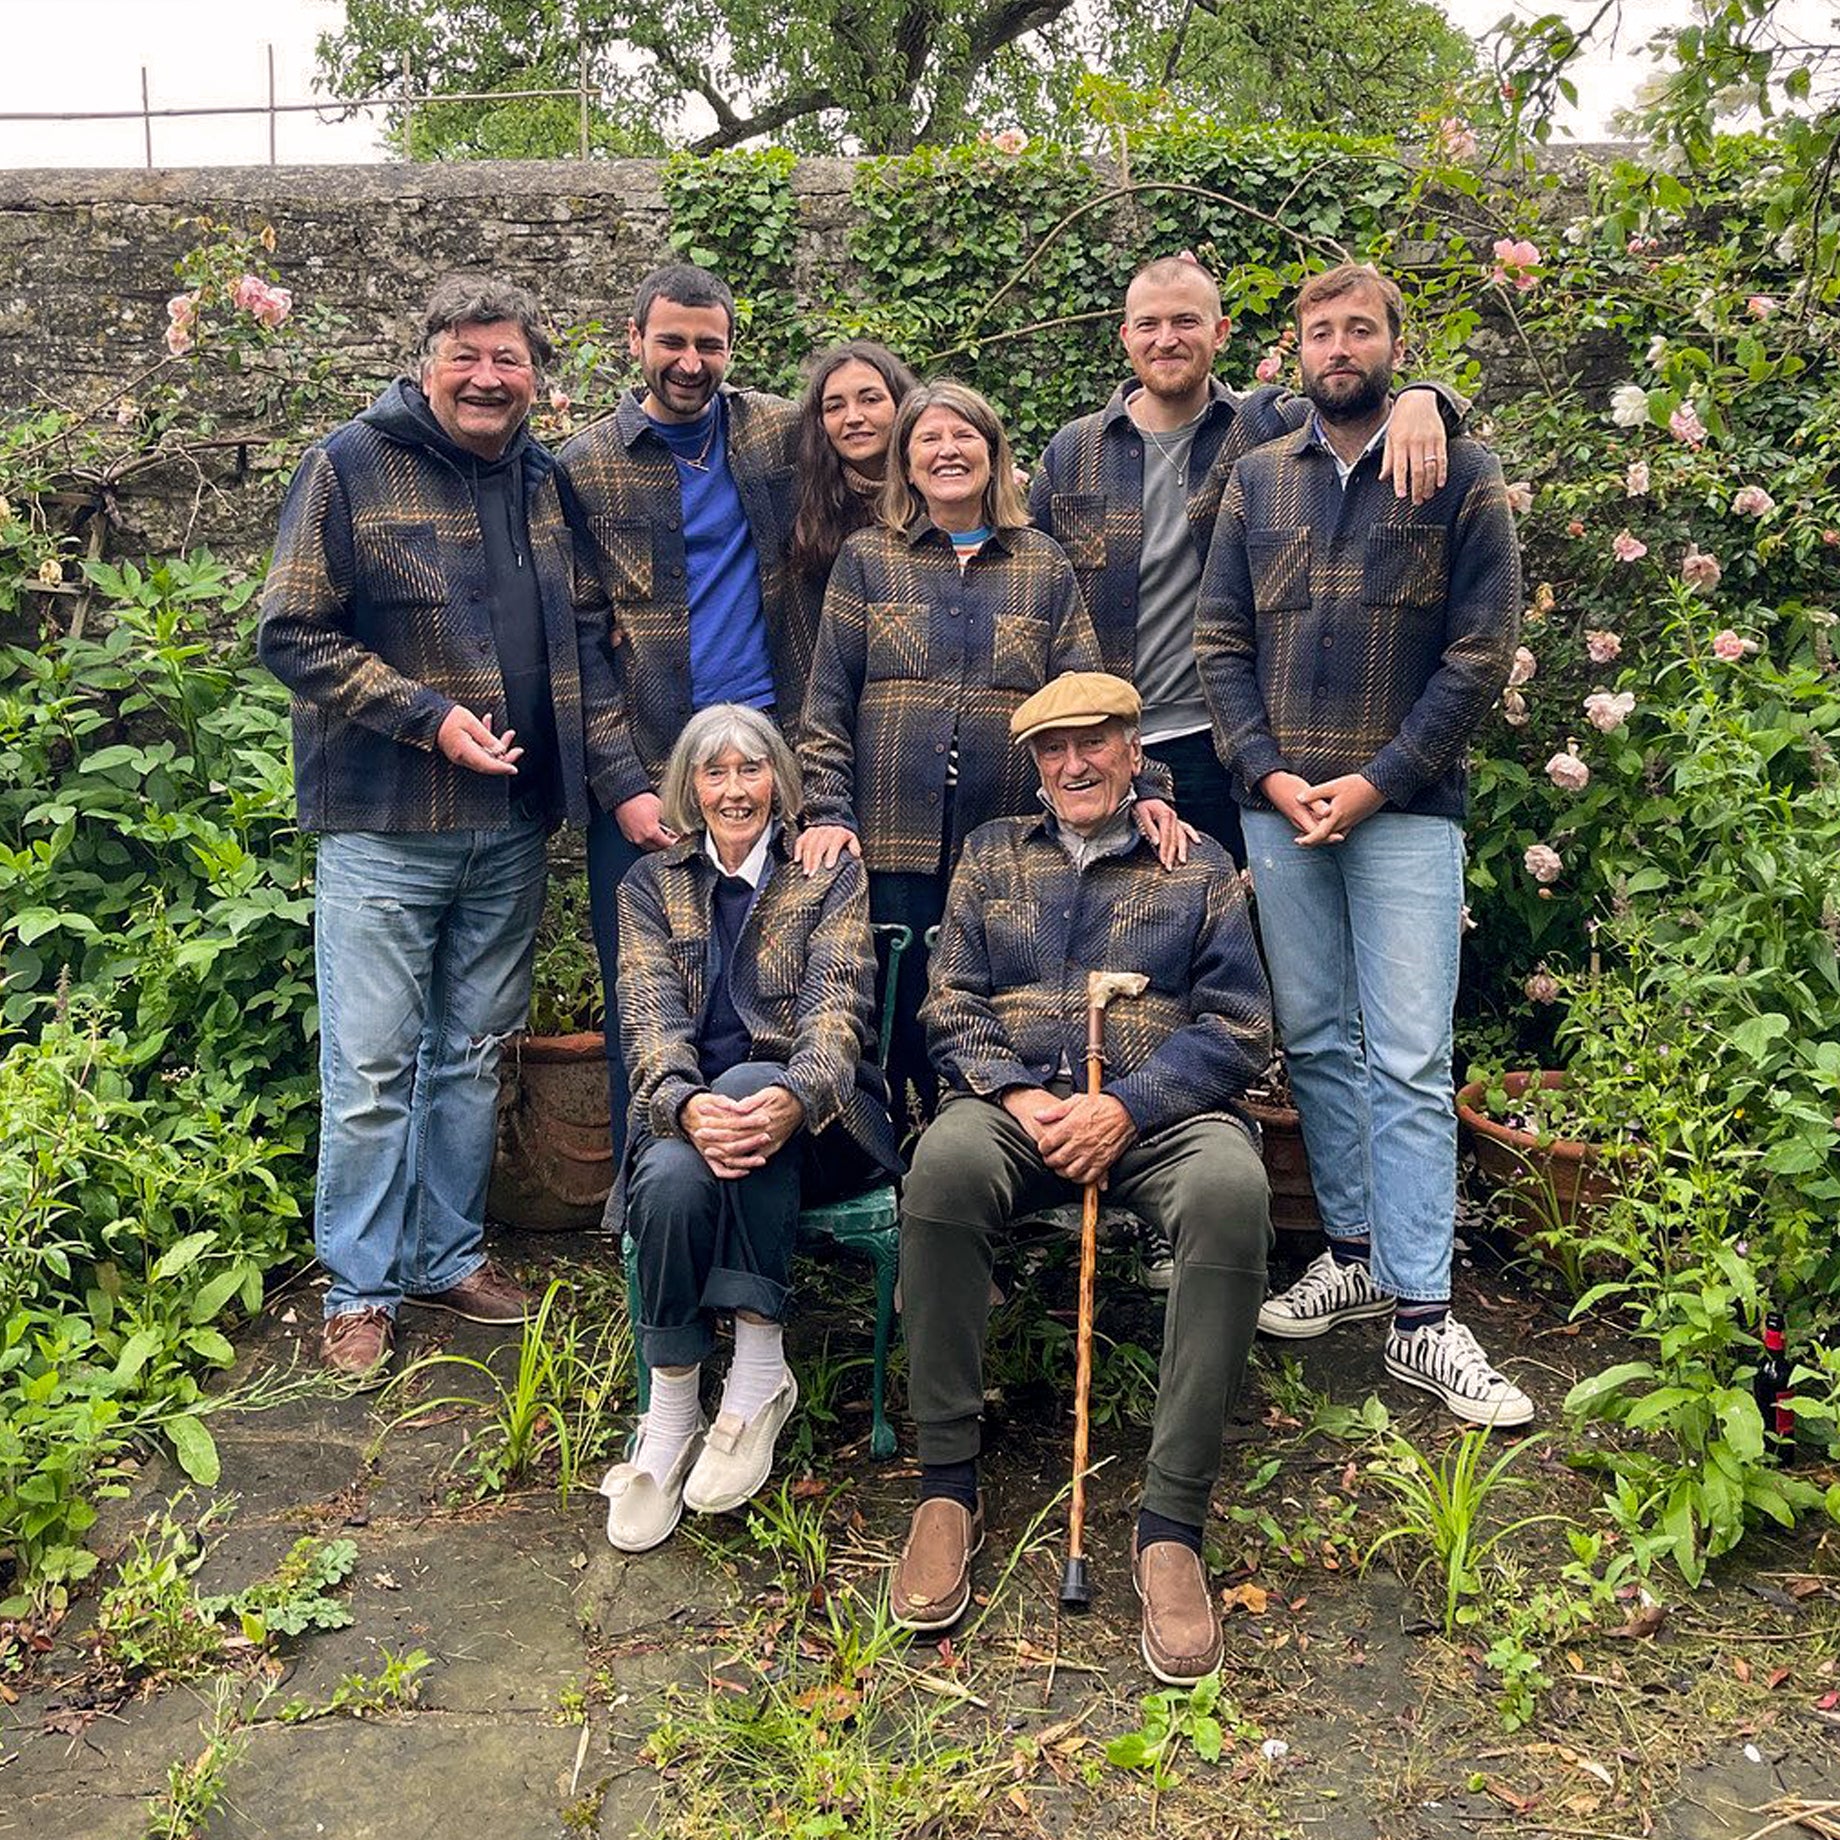 Wax London founder Tom's family wearing Whiting Overshirts in a garden setting